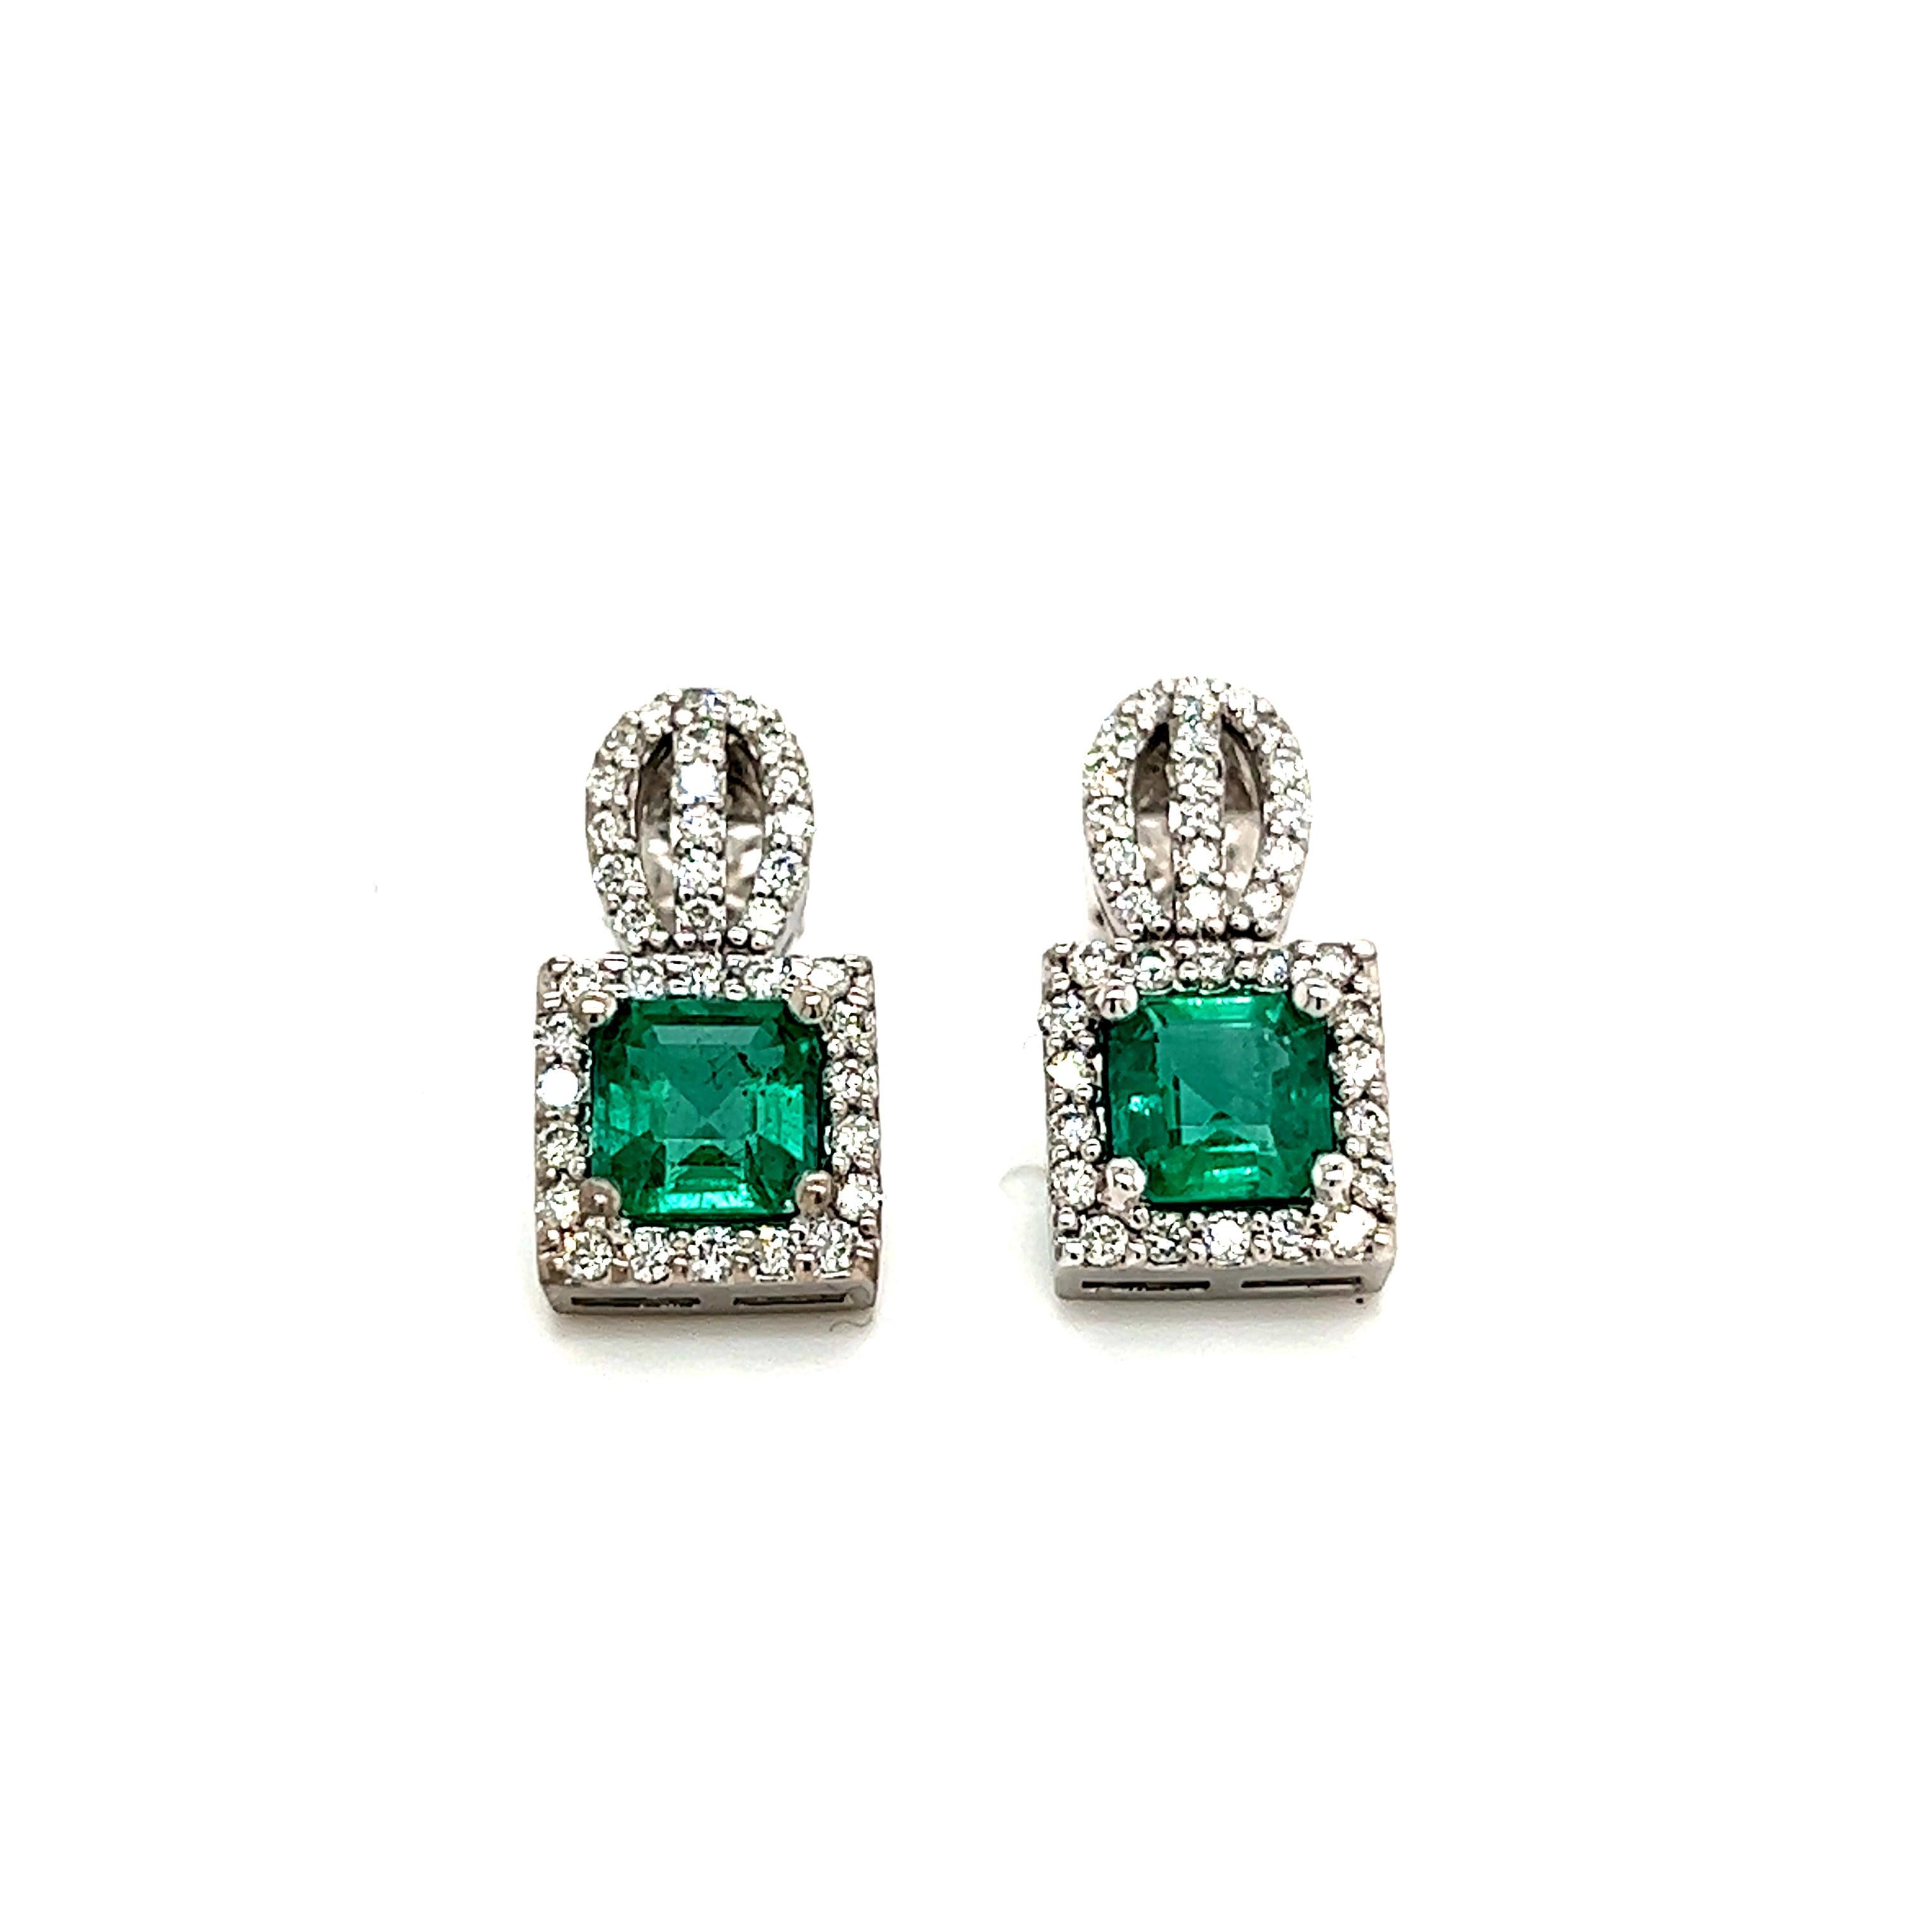 Natural Emerald Diamond Stud Earrings 14k Gold 2.84 TCW Certified For Sale 3